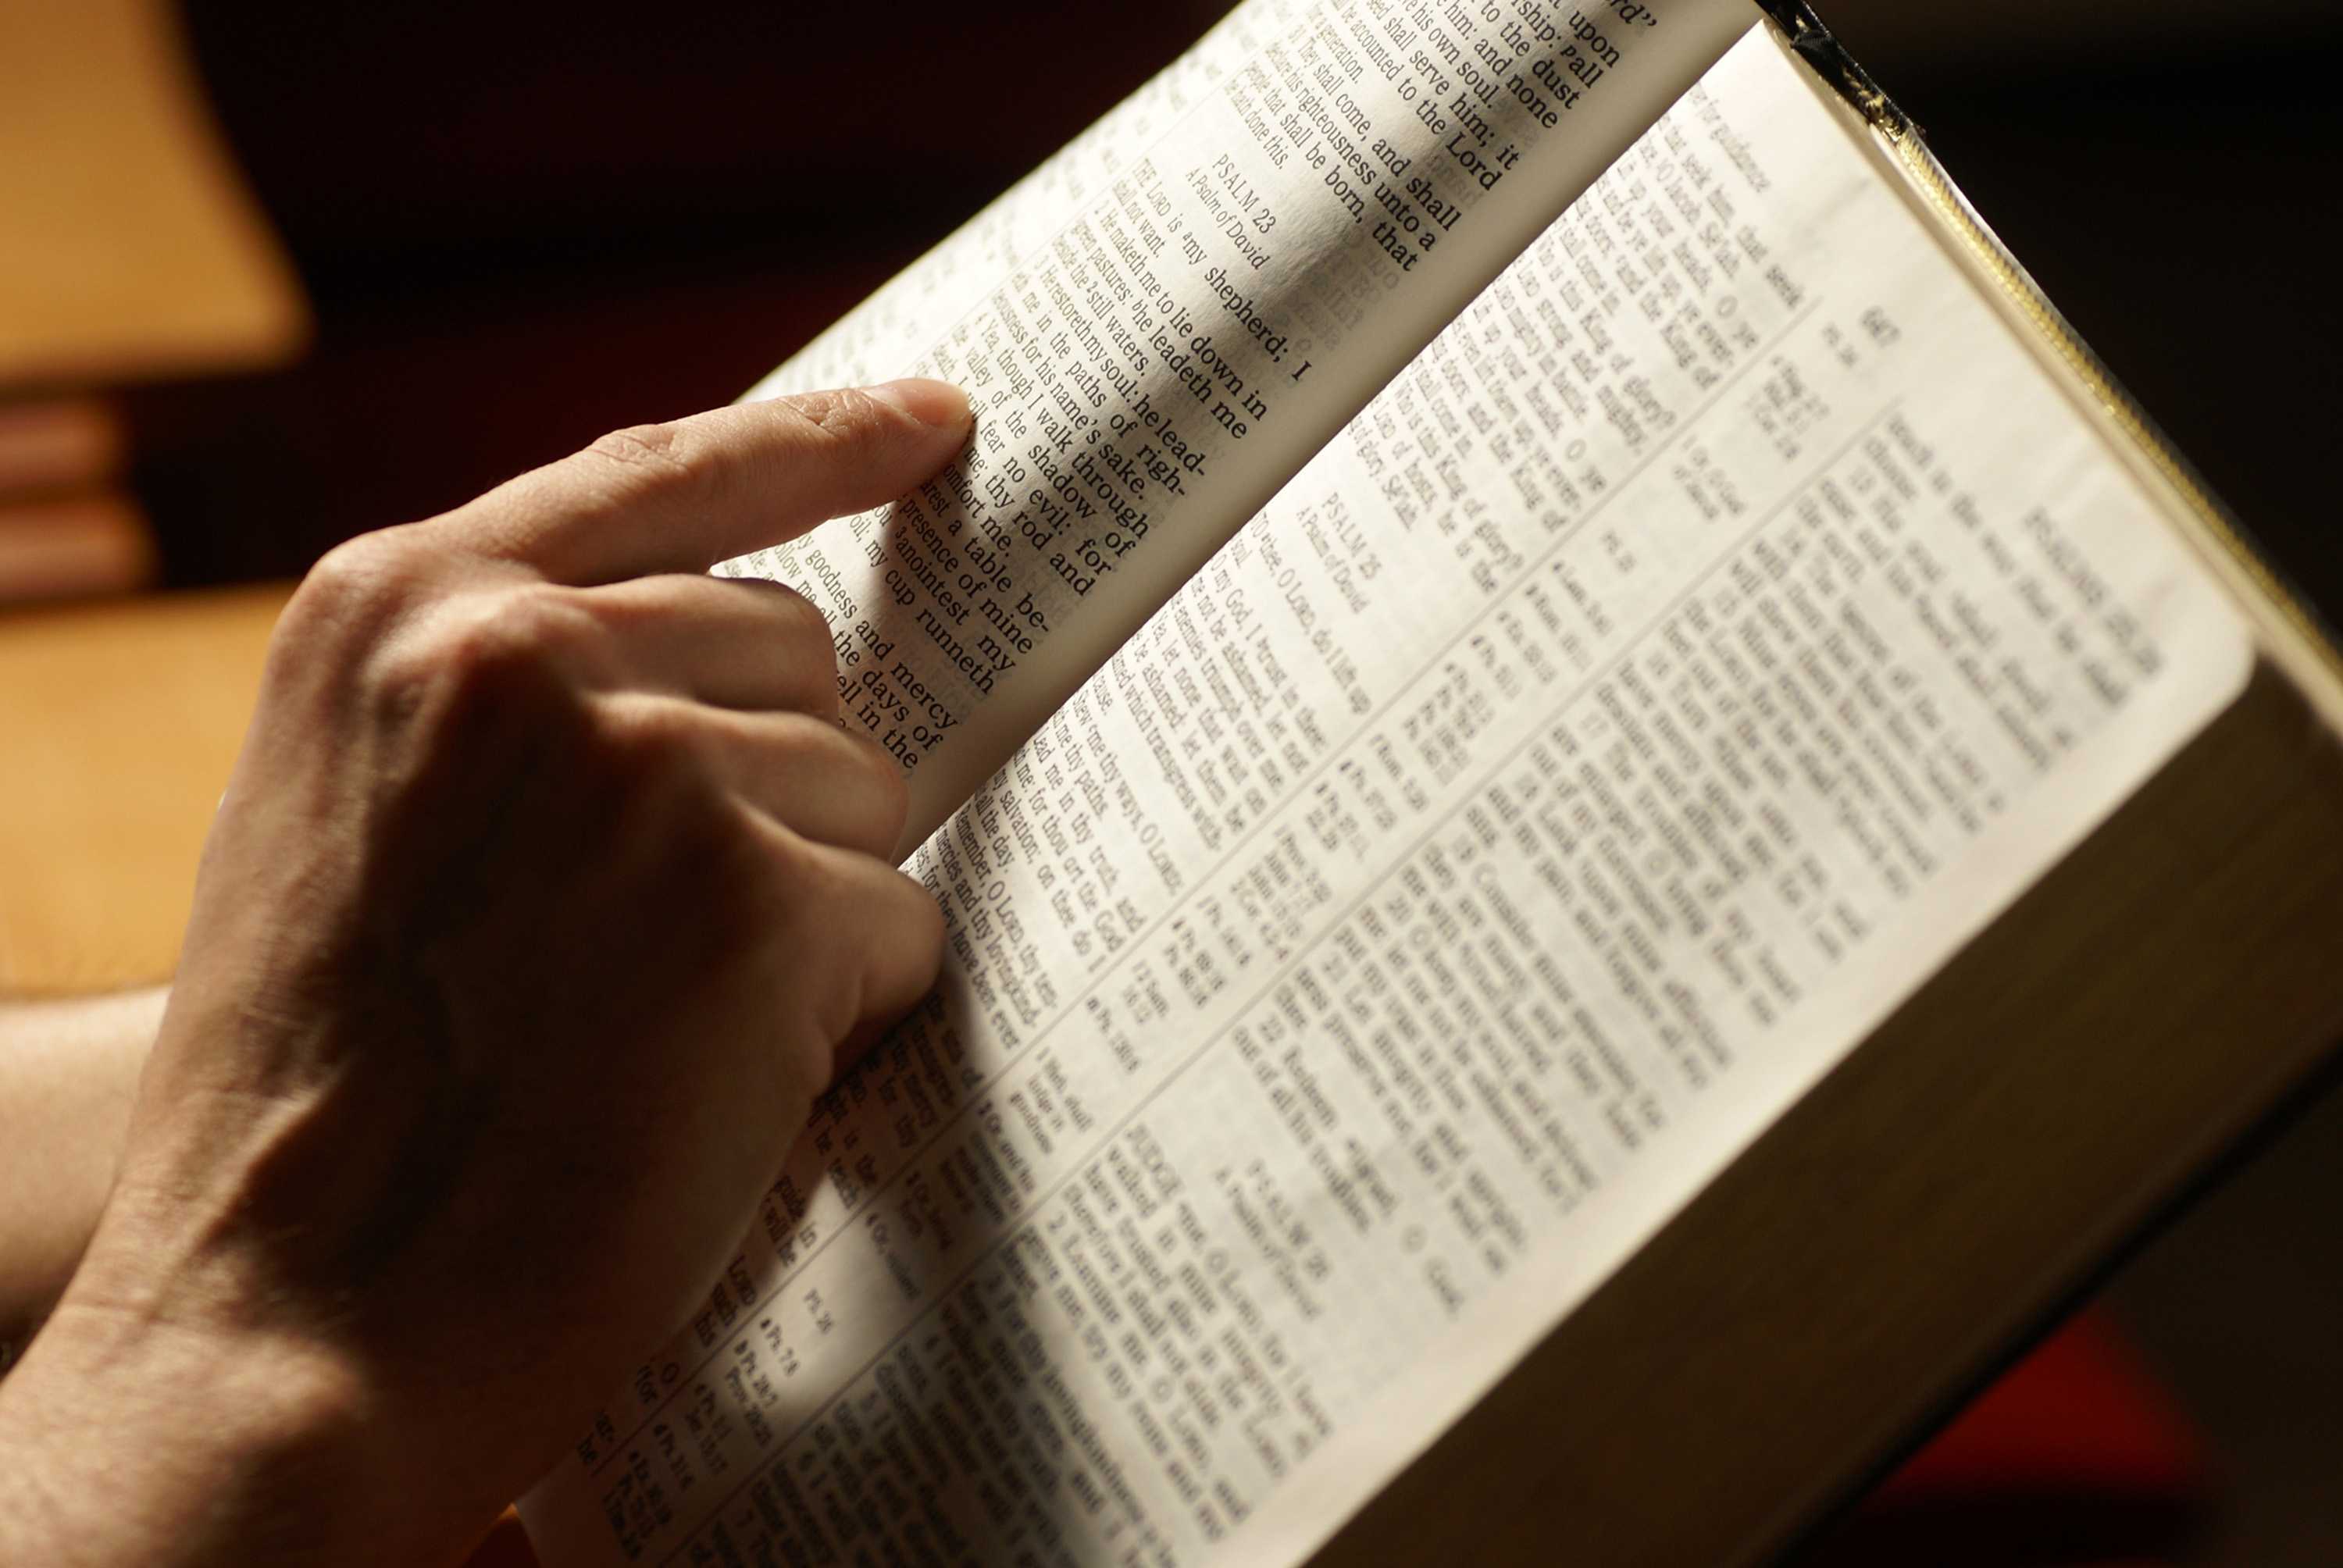 A Kansas public elementary school is ending the free distribution of Bibles to students after complaints that the practice violates the constitutional separation of church and state, the school superintendent said. (Dreamstime)